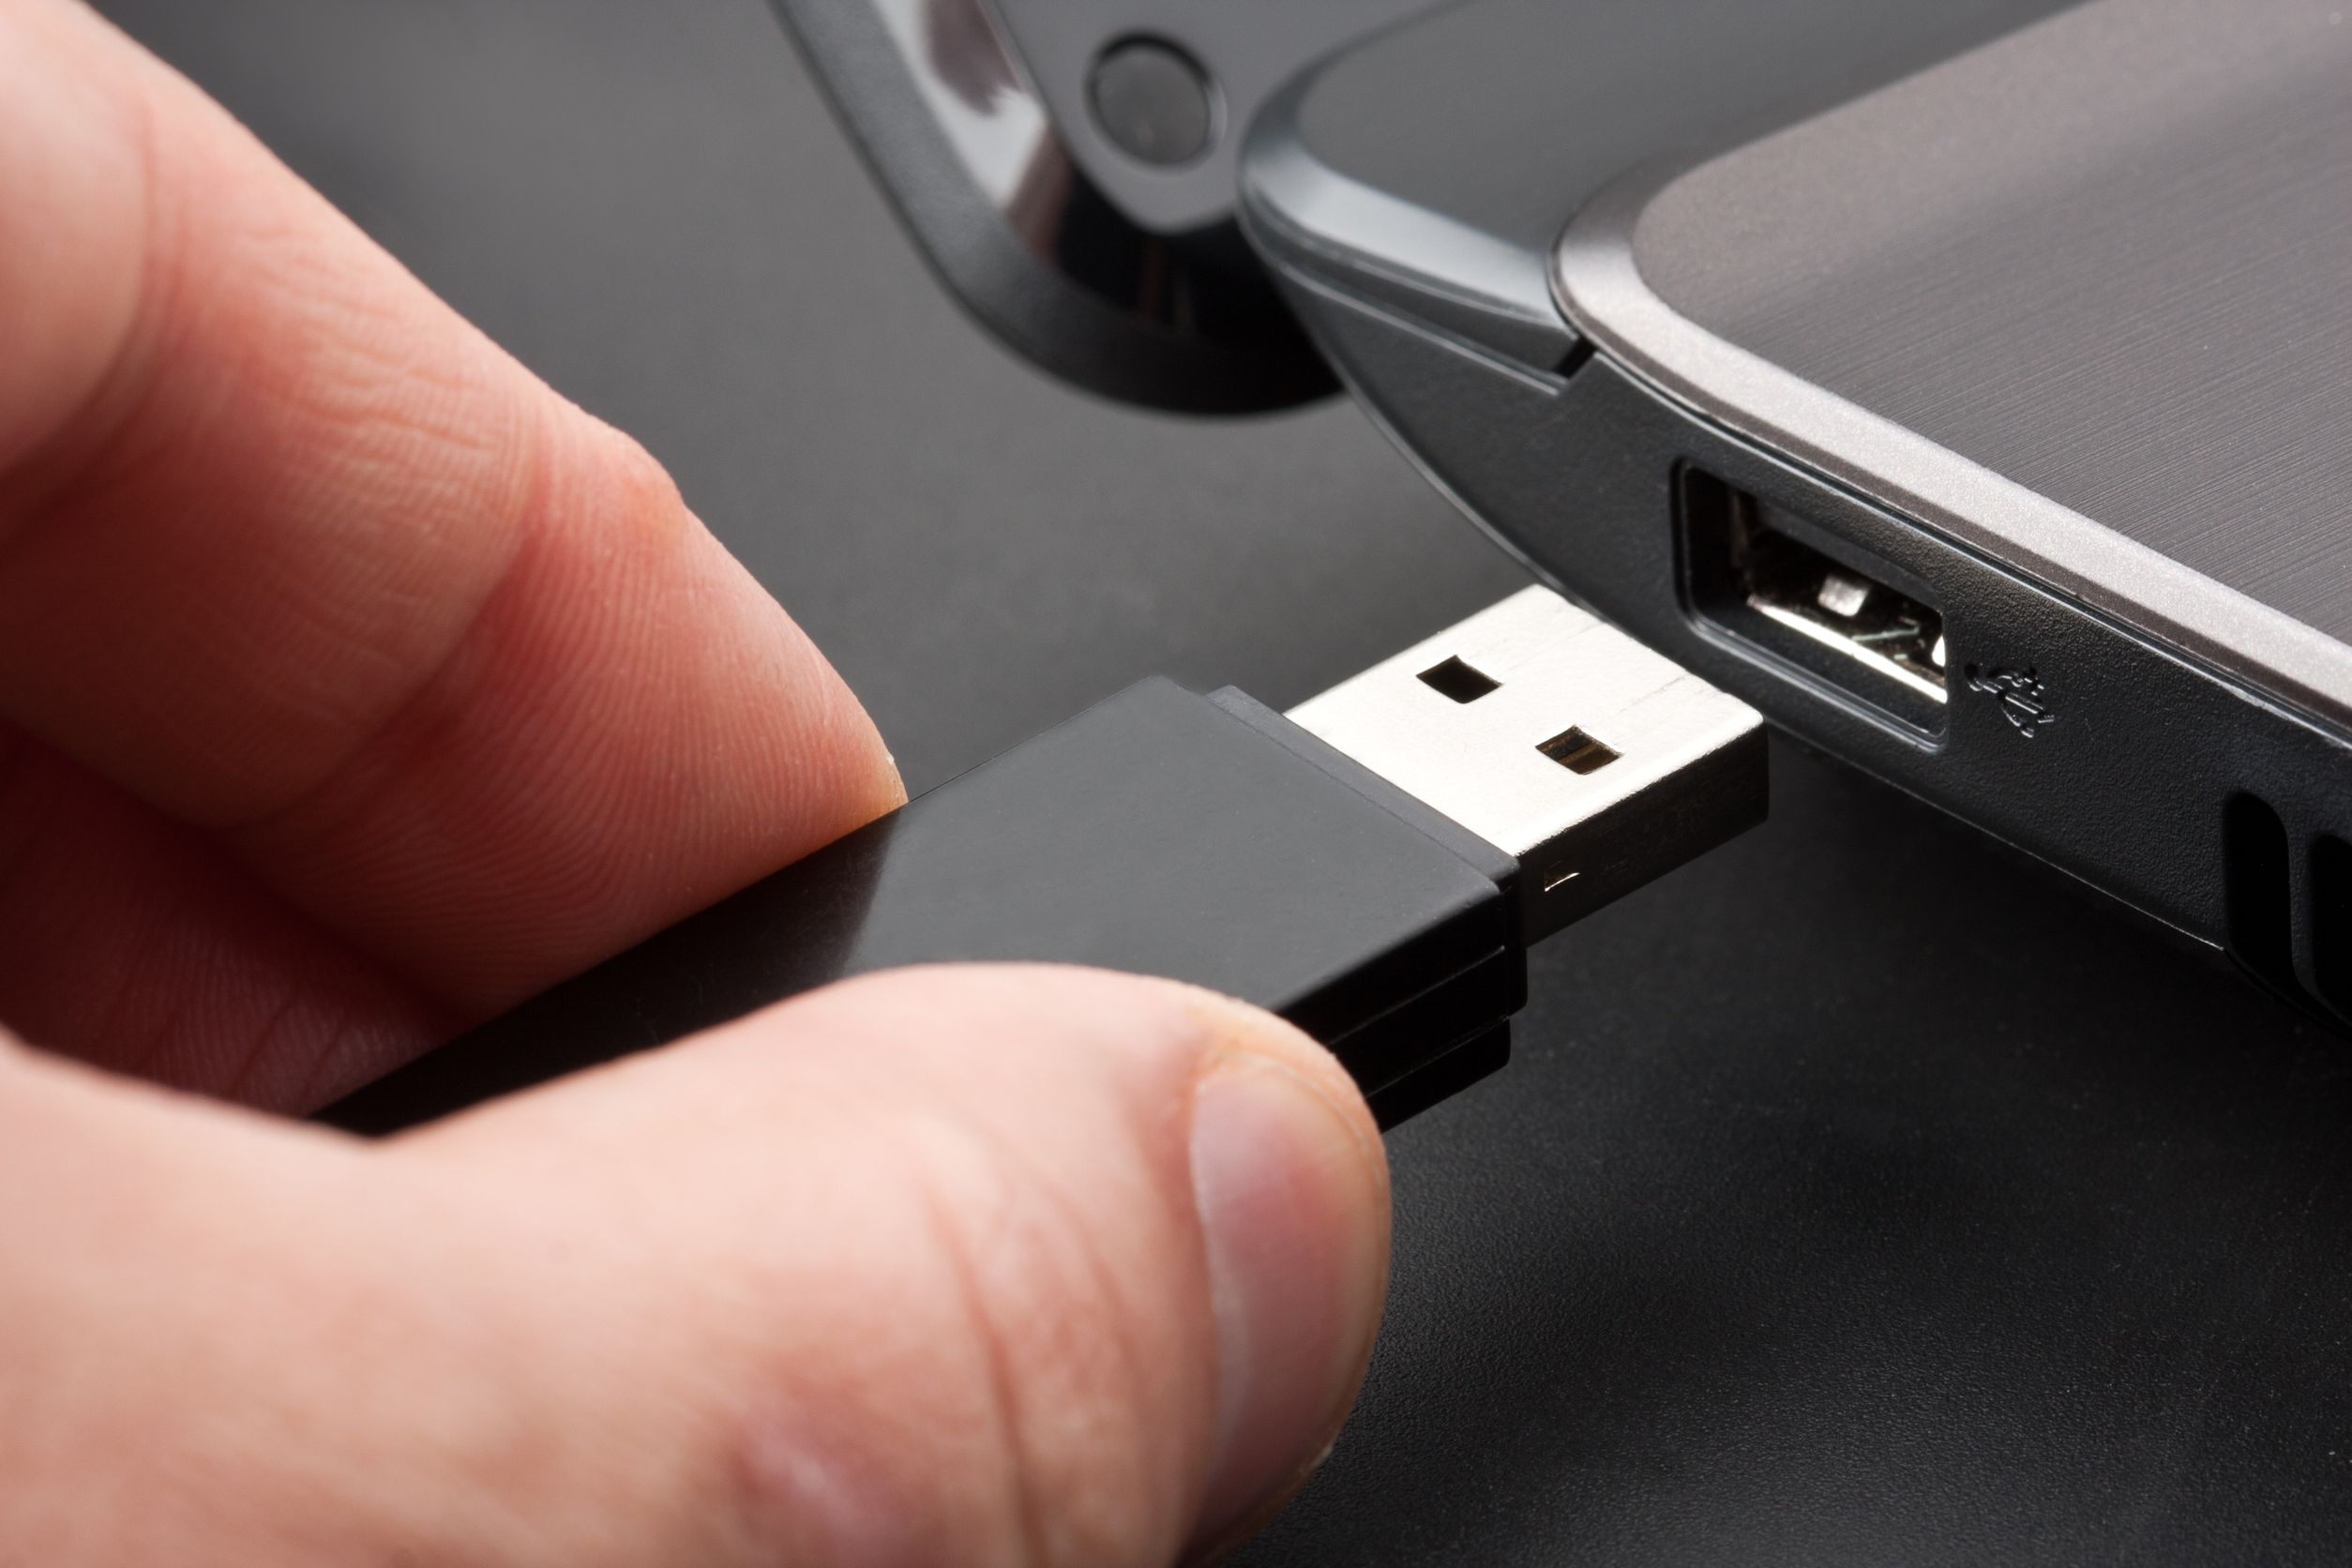 This New USB Stick That Anyone Can Buy Destroys Almost Anything It Is  Plugged Into